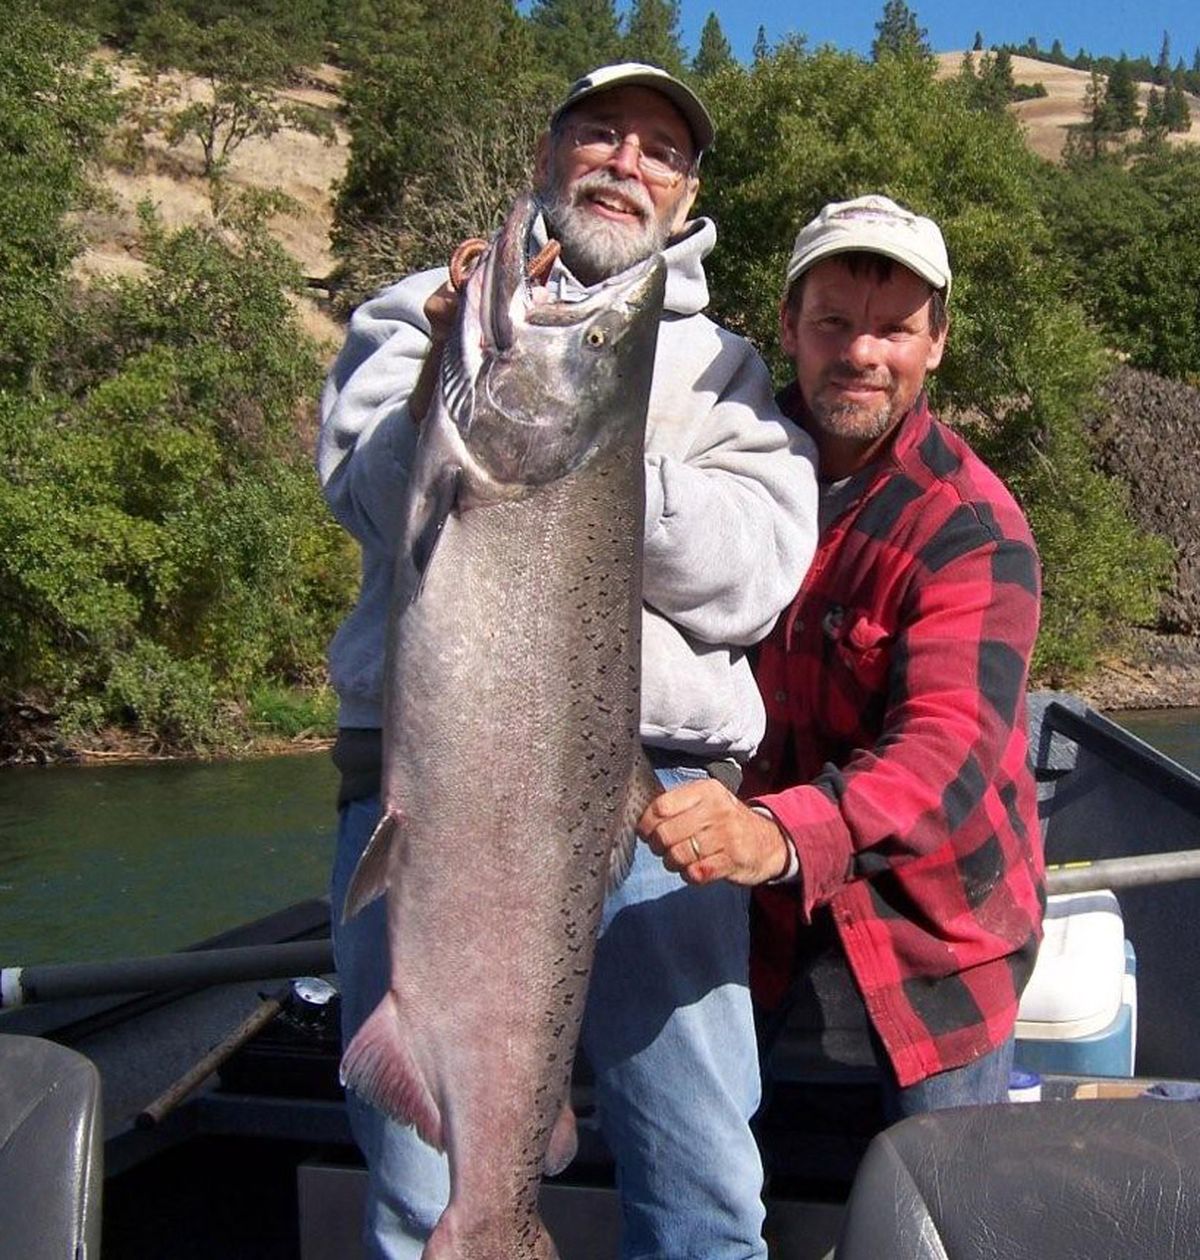 Tracy Zoller, owner of Adventure Fishing guide service based in Klickitat, Wash., helped his client, Ray Fitzsimmons of White Salmon, Wash., land this fall chinook salmon on the Klickitat River in September. Photo courtesy of Adventure Fishing (Photo courtesy of Adventure Fishing / The Spokesman-Review)